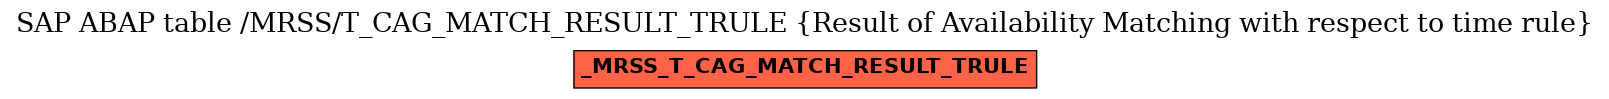 E-R Diagram for table /MRSS/T_CAG_MATCH_RESULT_TRULE (Result of Availability Matching with respect to time rule)